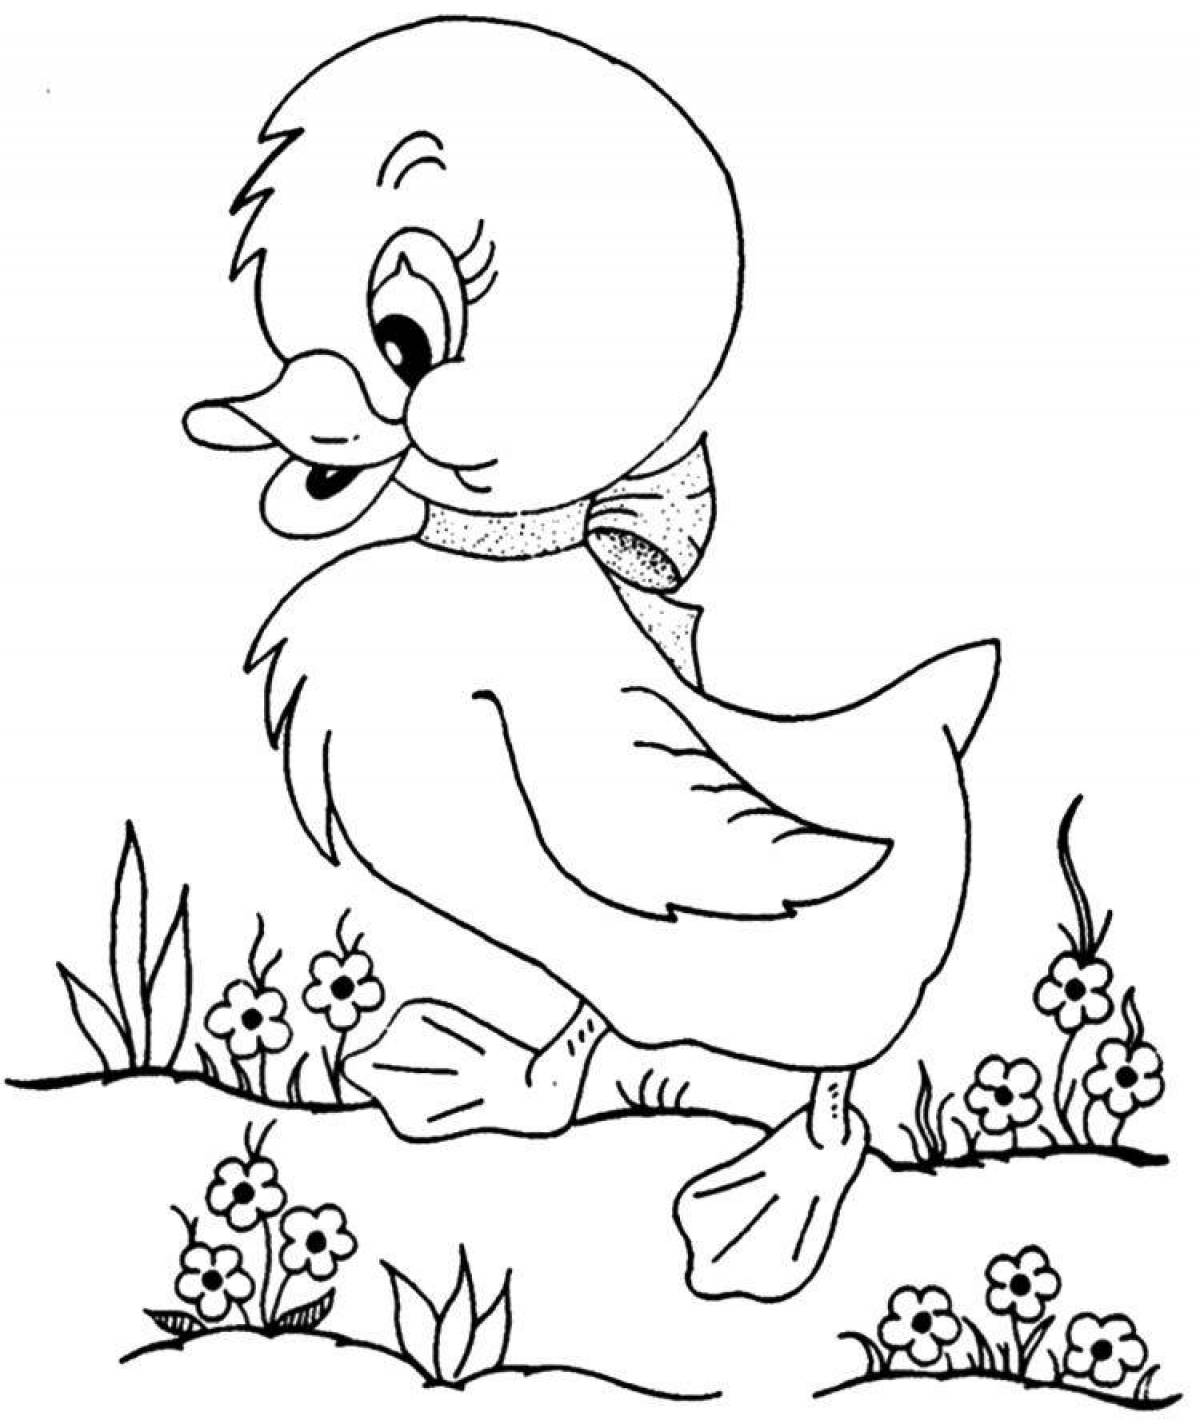 Coloring brave duck - wild